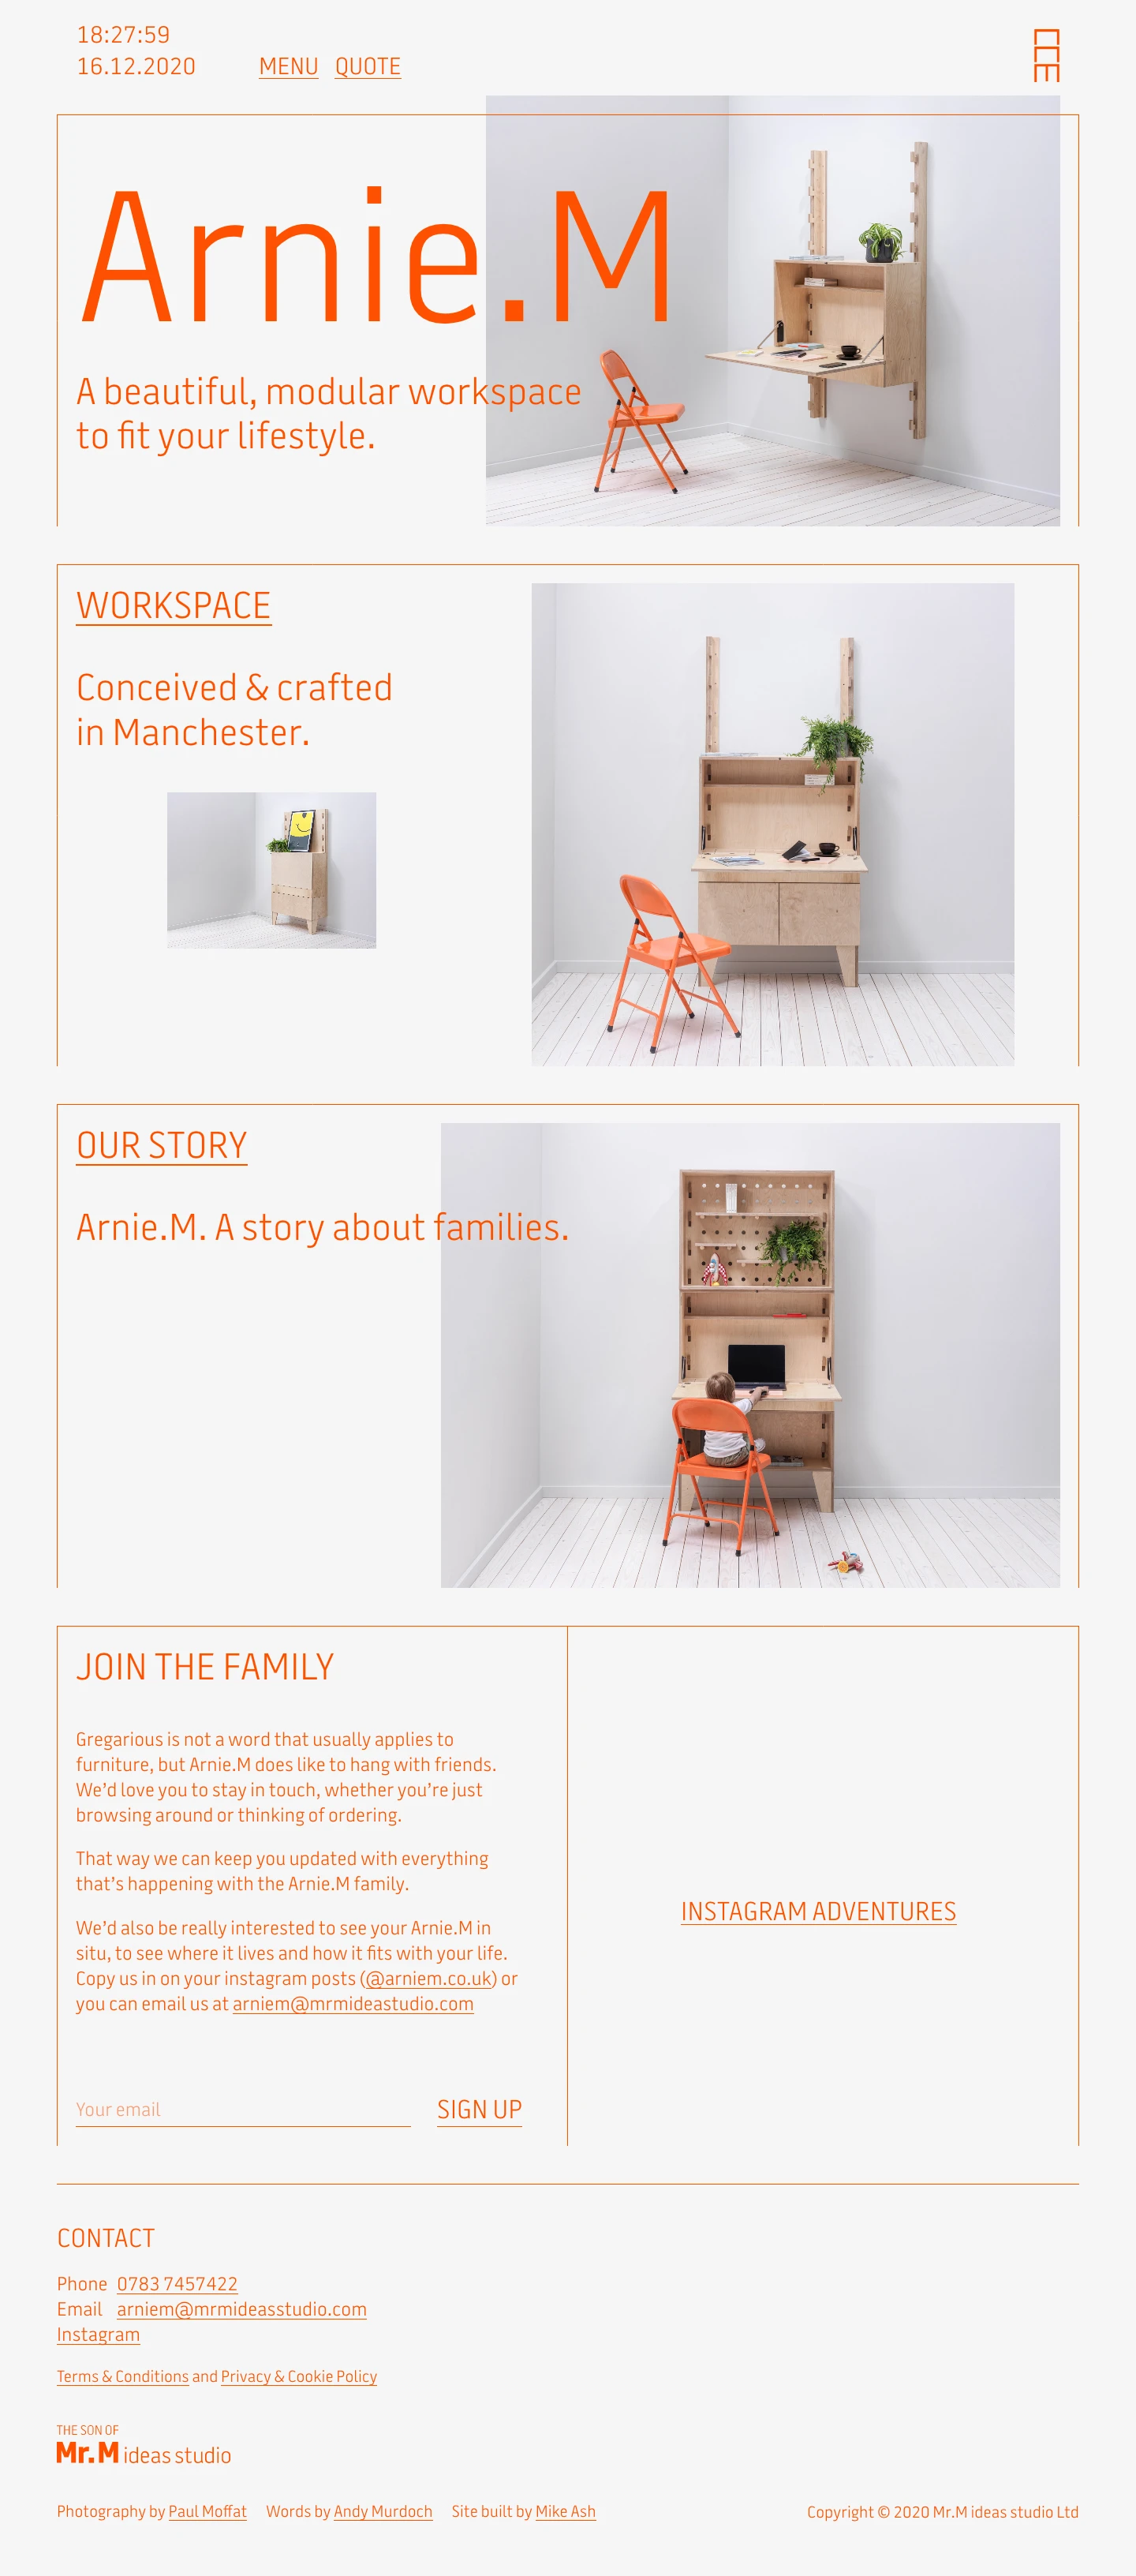 Arnie.M Landing Page Example: A beautiful, modular workspace to fit your lifestyle.